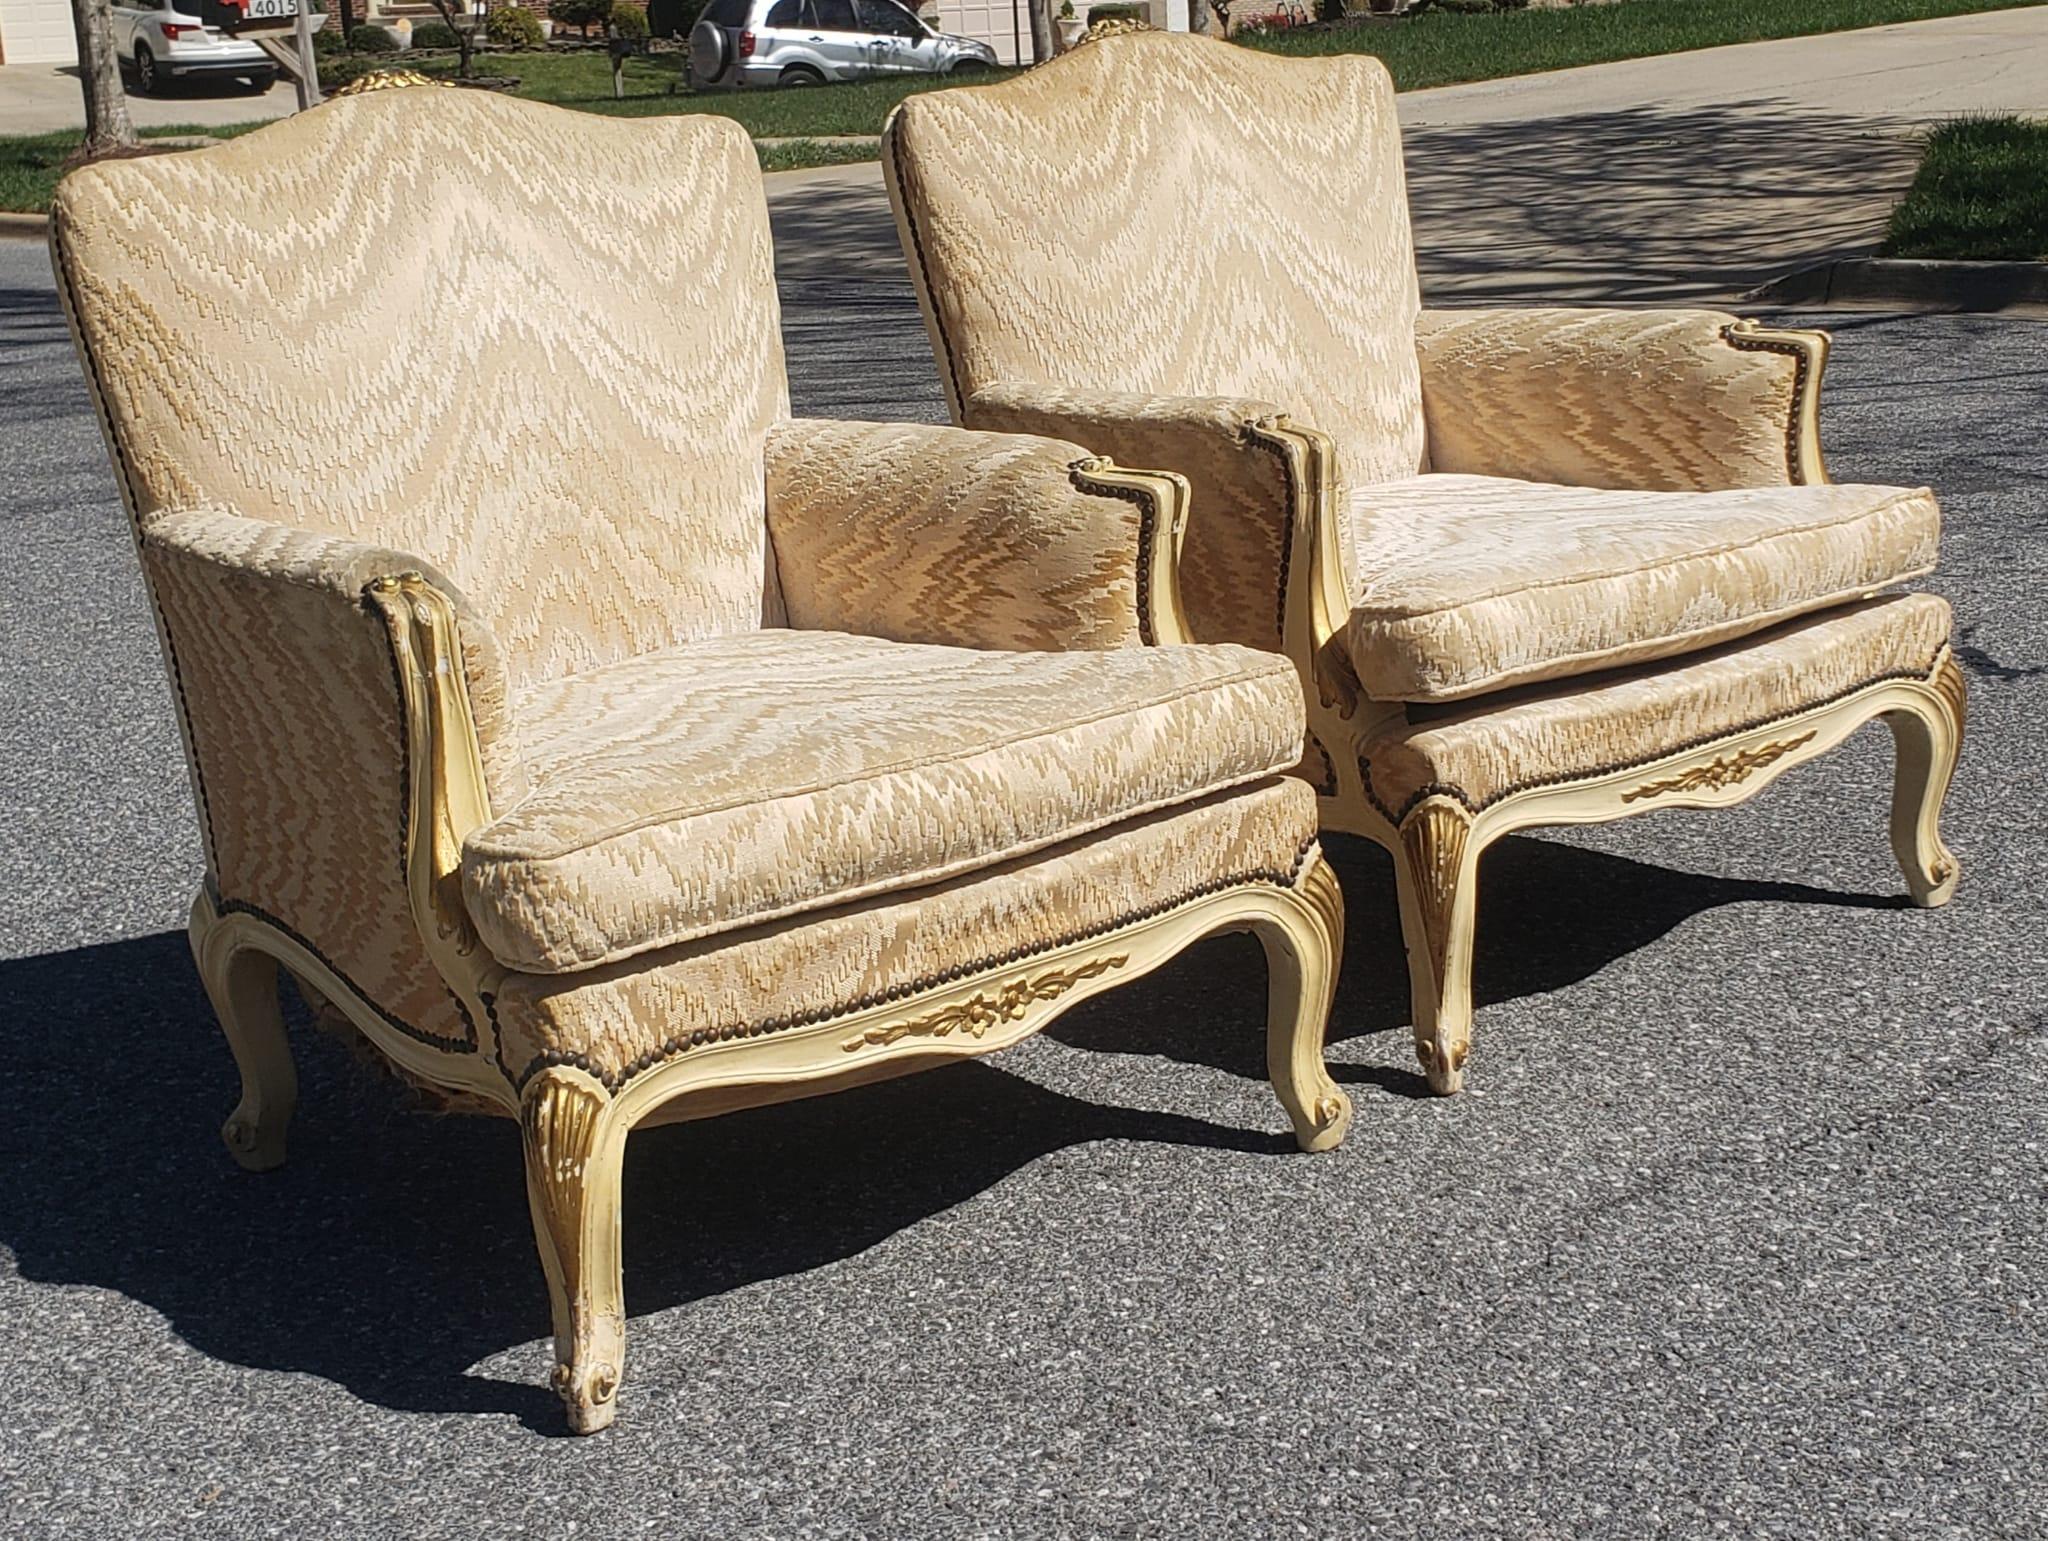 Pair of Louis XV Carved, parcel gilt and Upholstered bergere chairs. High Quality upholstery in very good vintage condition. Very firm and comfortable seats. Measure 29